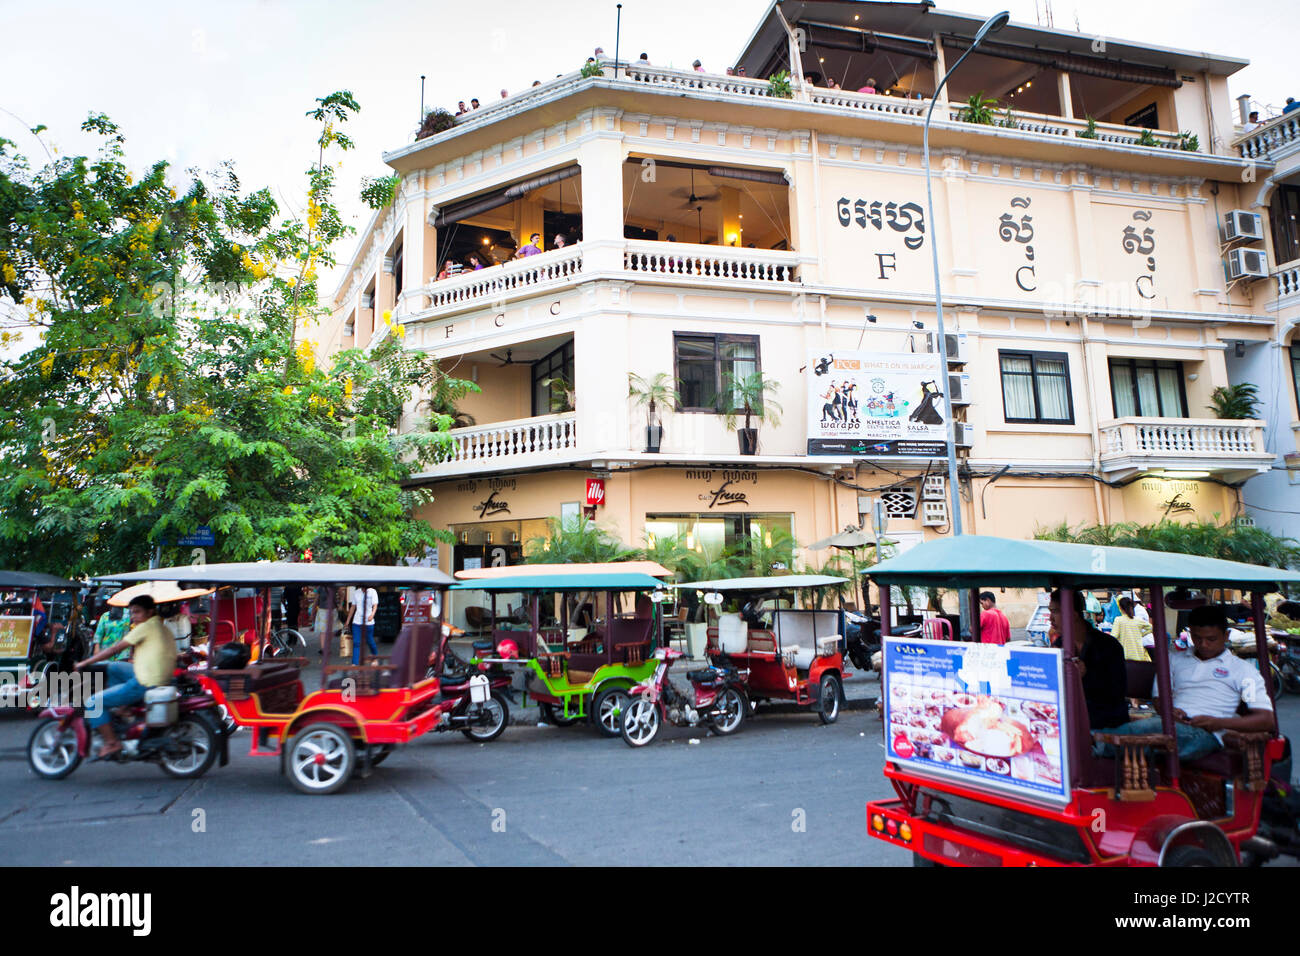 The FCC or Foreign Correspondence Club in Phnom Penh, Cambodia. Stock Photo